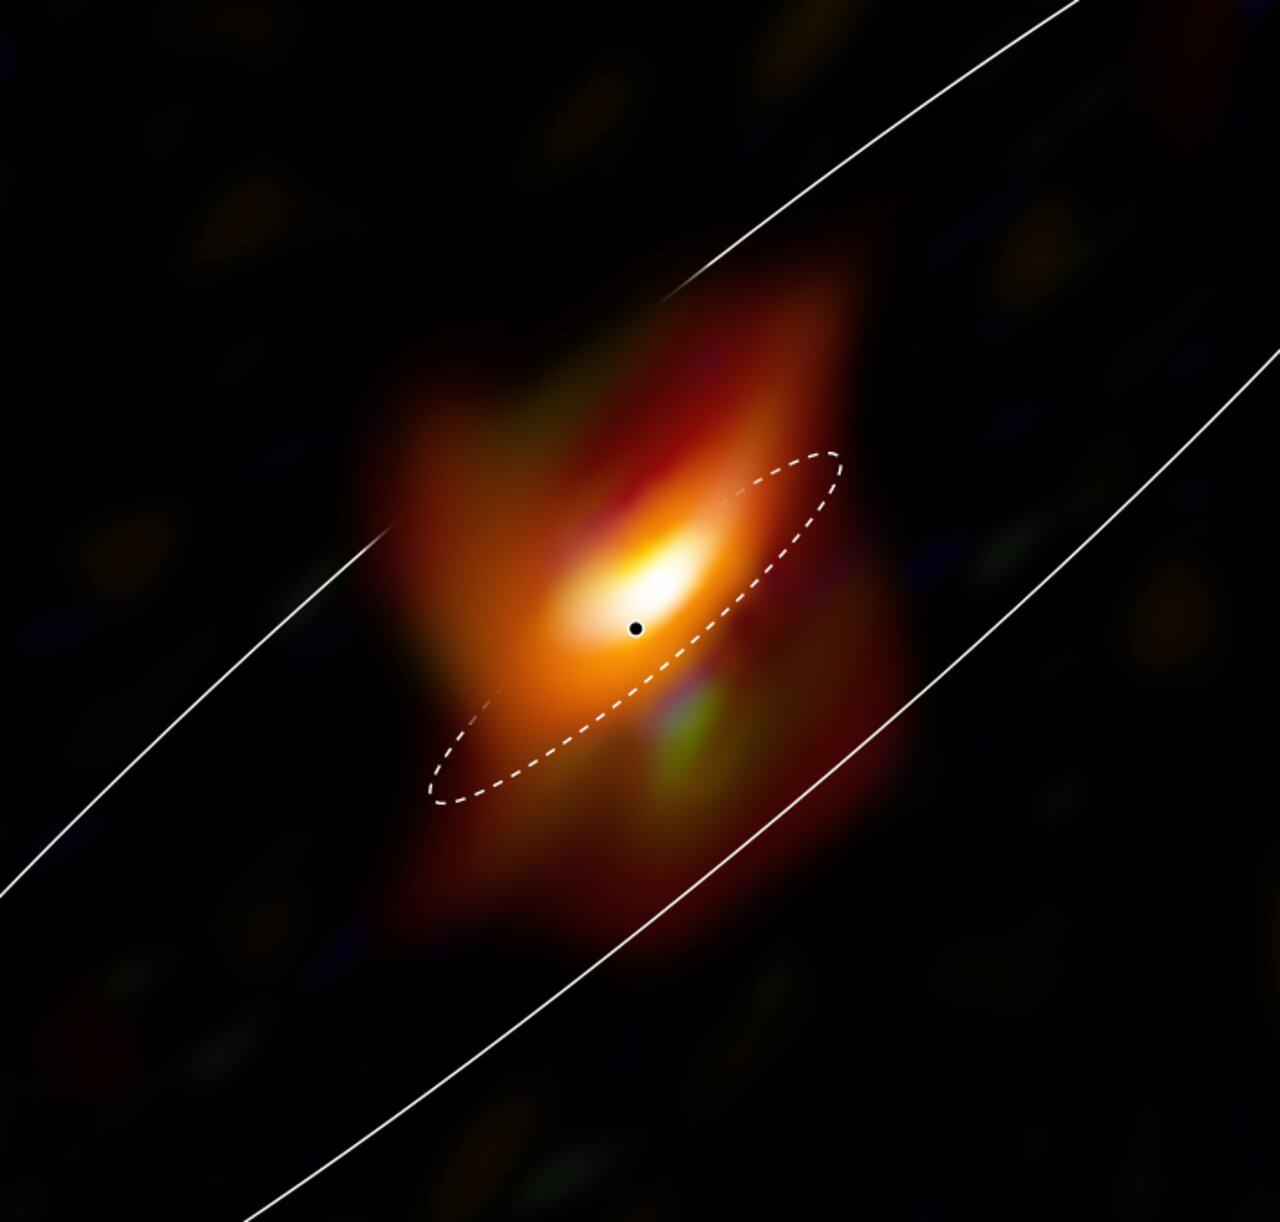 Observations made on the VLT telescope (color) with the possible location of the central black hole of the galaxy M77